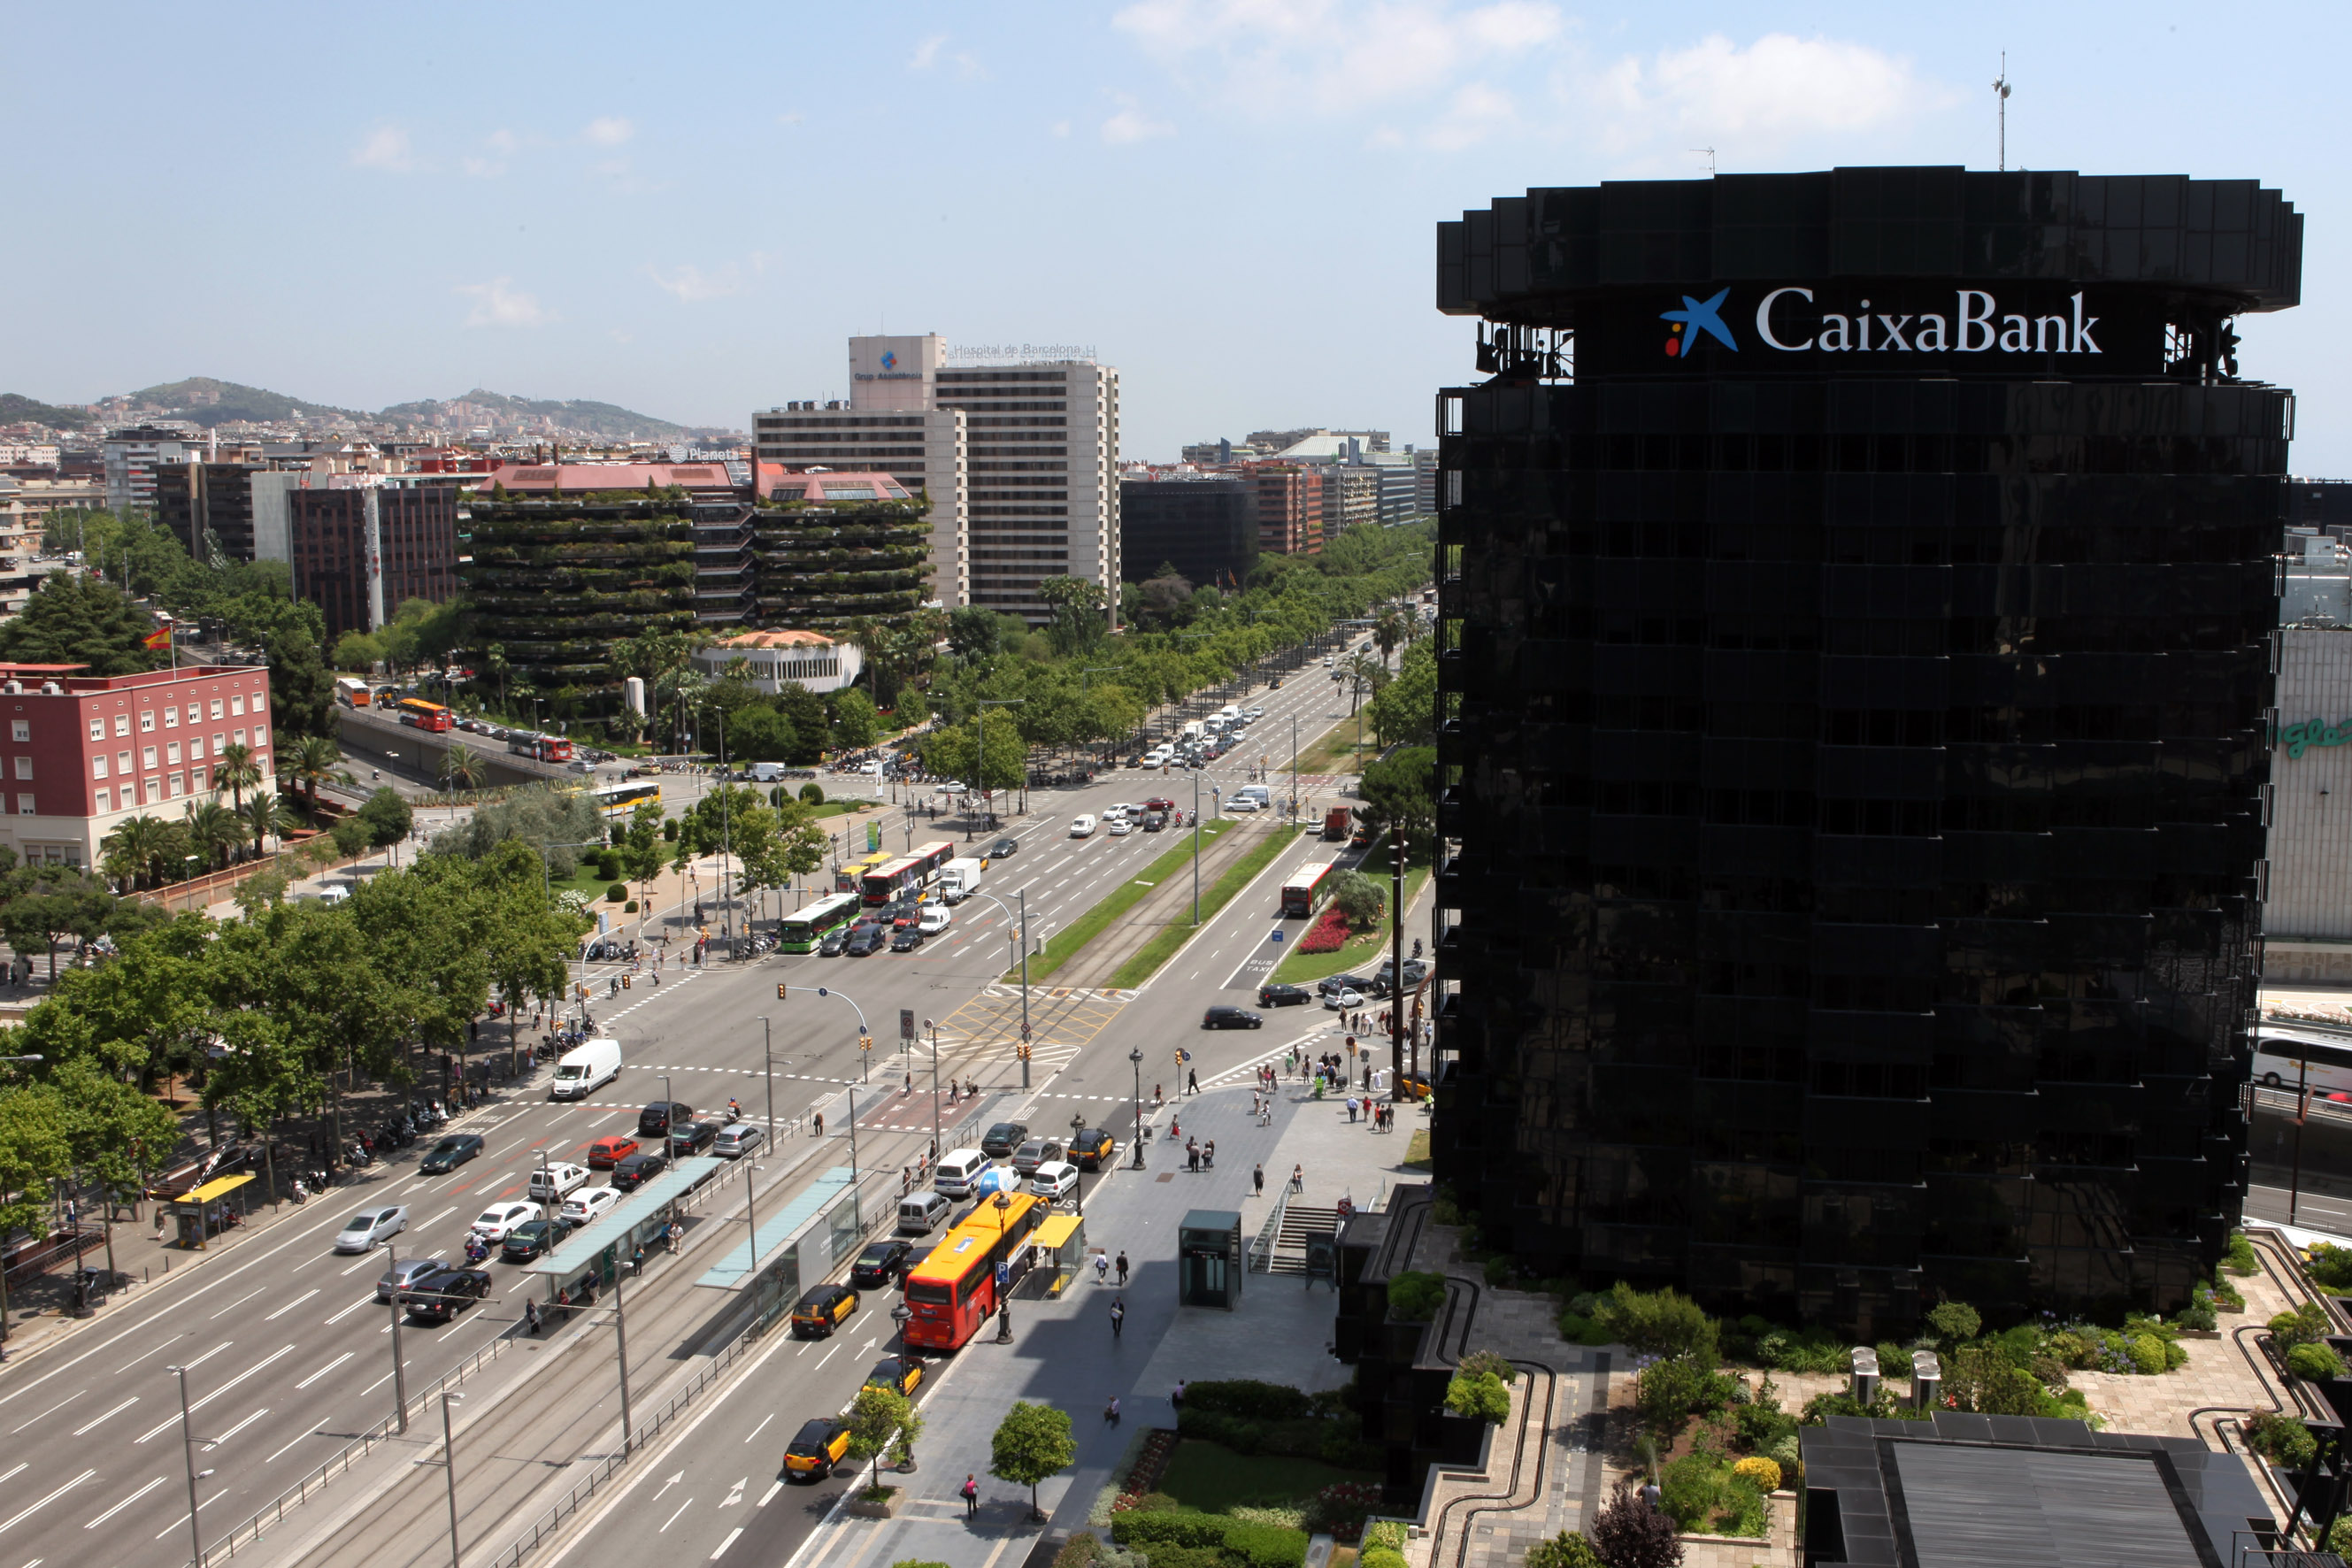 Image of CaixaBank's headquarters in Barcelona (by ACN)